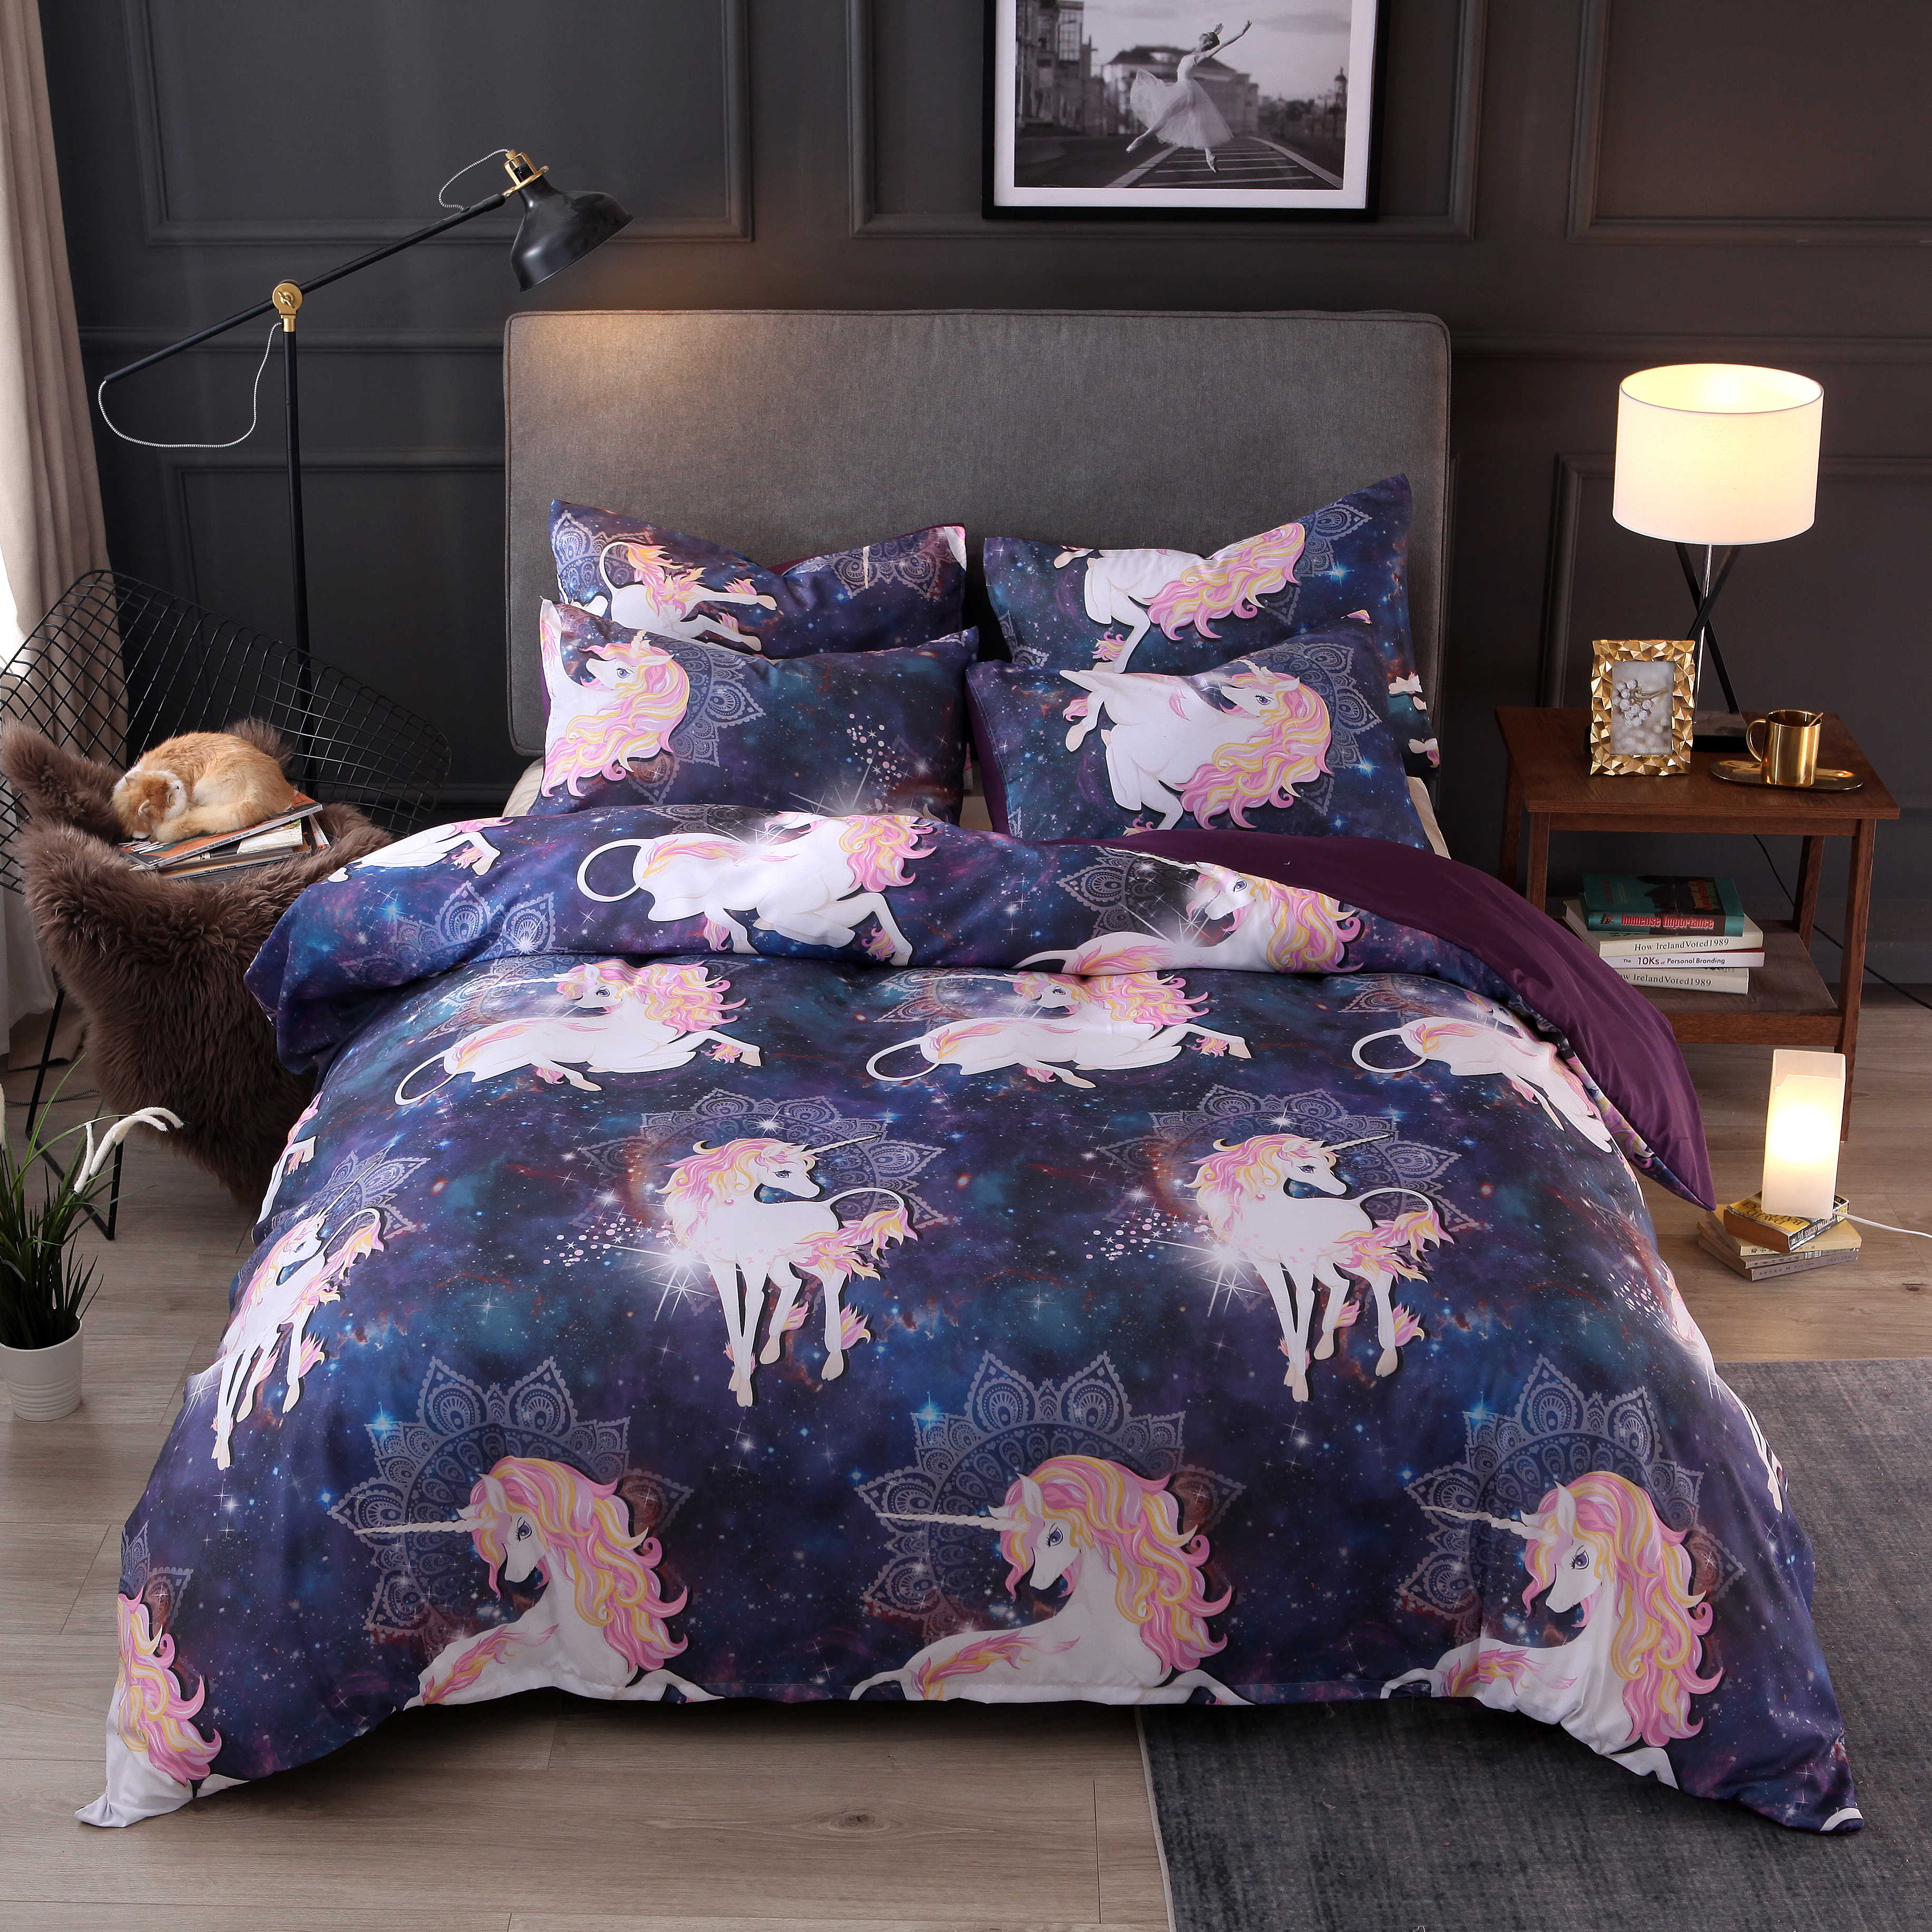 

3 PCS Bedding Sets Unicorn And Campanula Quilt Cover Pillowcase For Queen Size